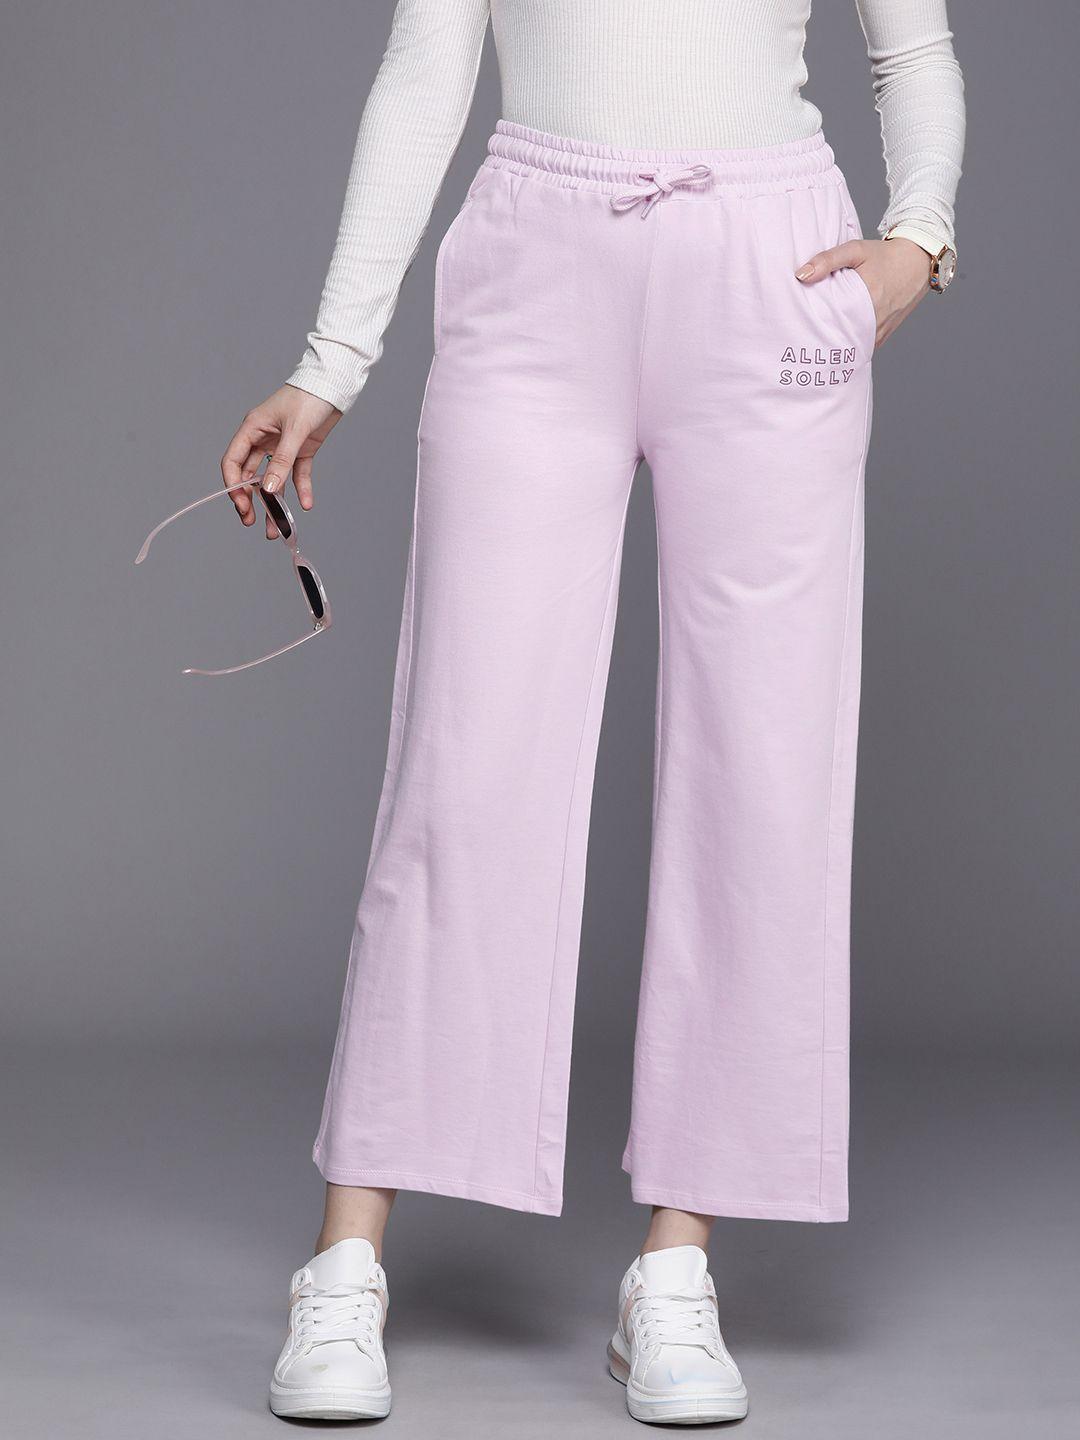 allen solly woman pure cotton casual trousers